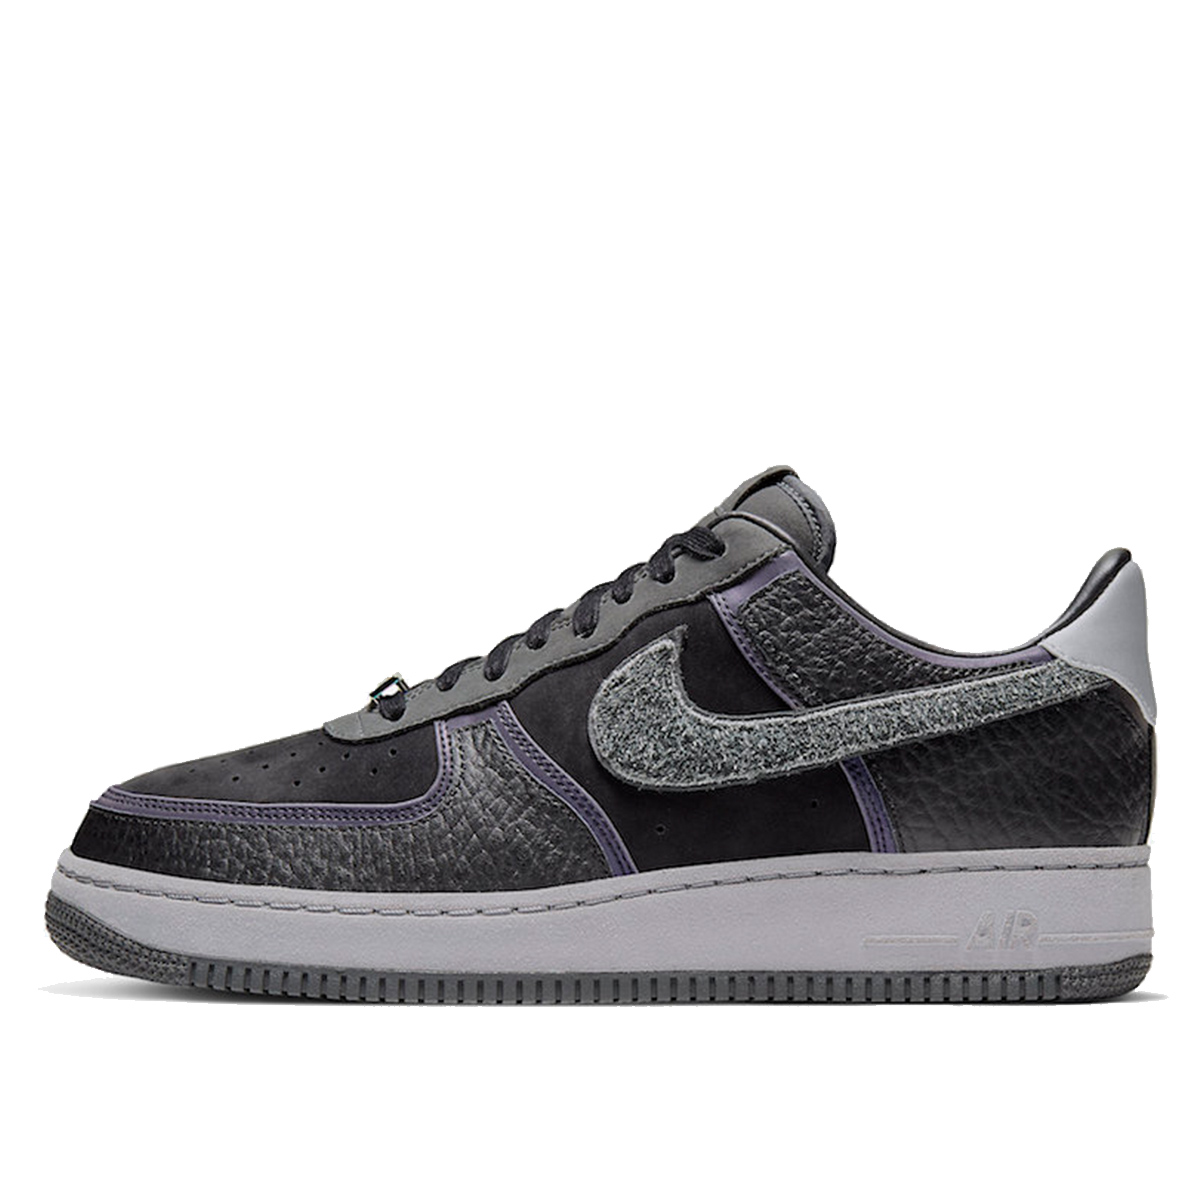 Nike x A Ma Maniére Air Force AF 1 Low 'Hand Wash Cold' Dark Grey (2019 ...